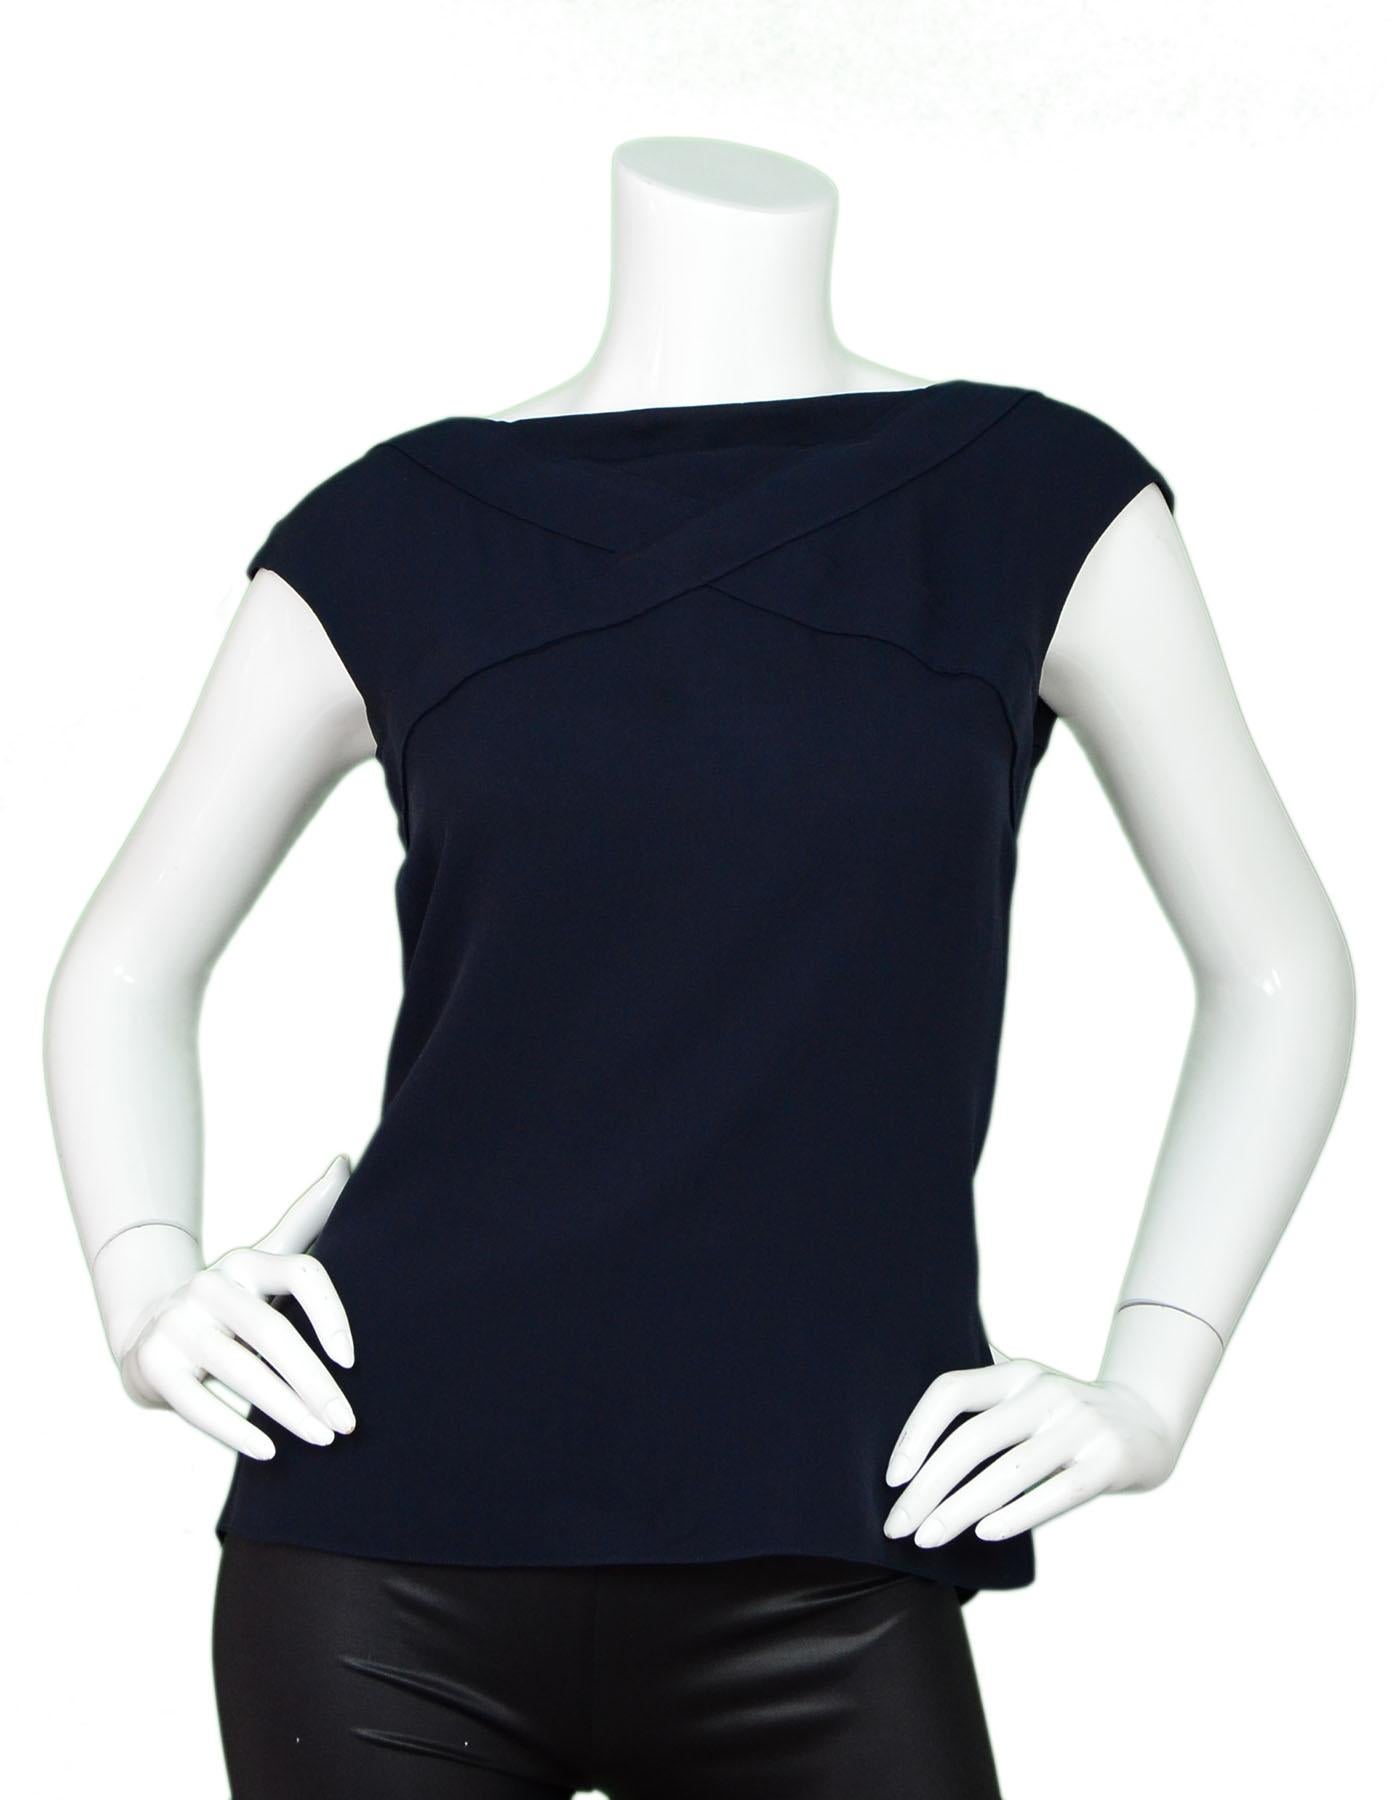 Chanel Navy Silk Top Sz FR38

Made In: France
Color: Navy
Composition: 100% silk
Lining: None
Closure/Opening: Button closure at back
Exterior Pockets: None
Interior Pockets: None
Overall Condition: Excellent pre-owned condition with the exception